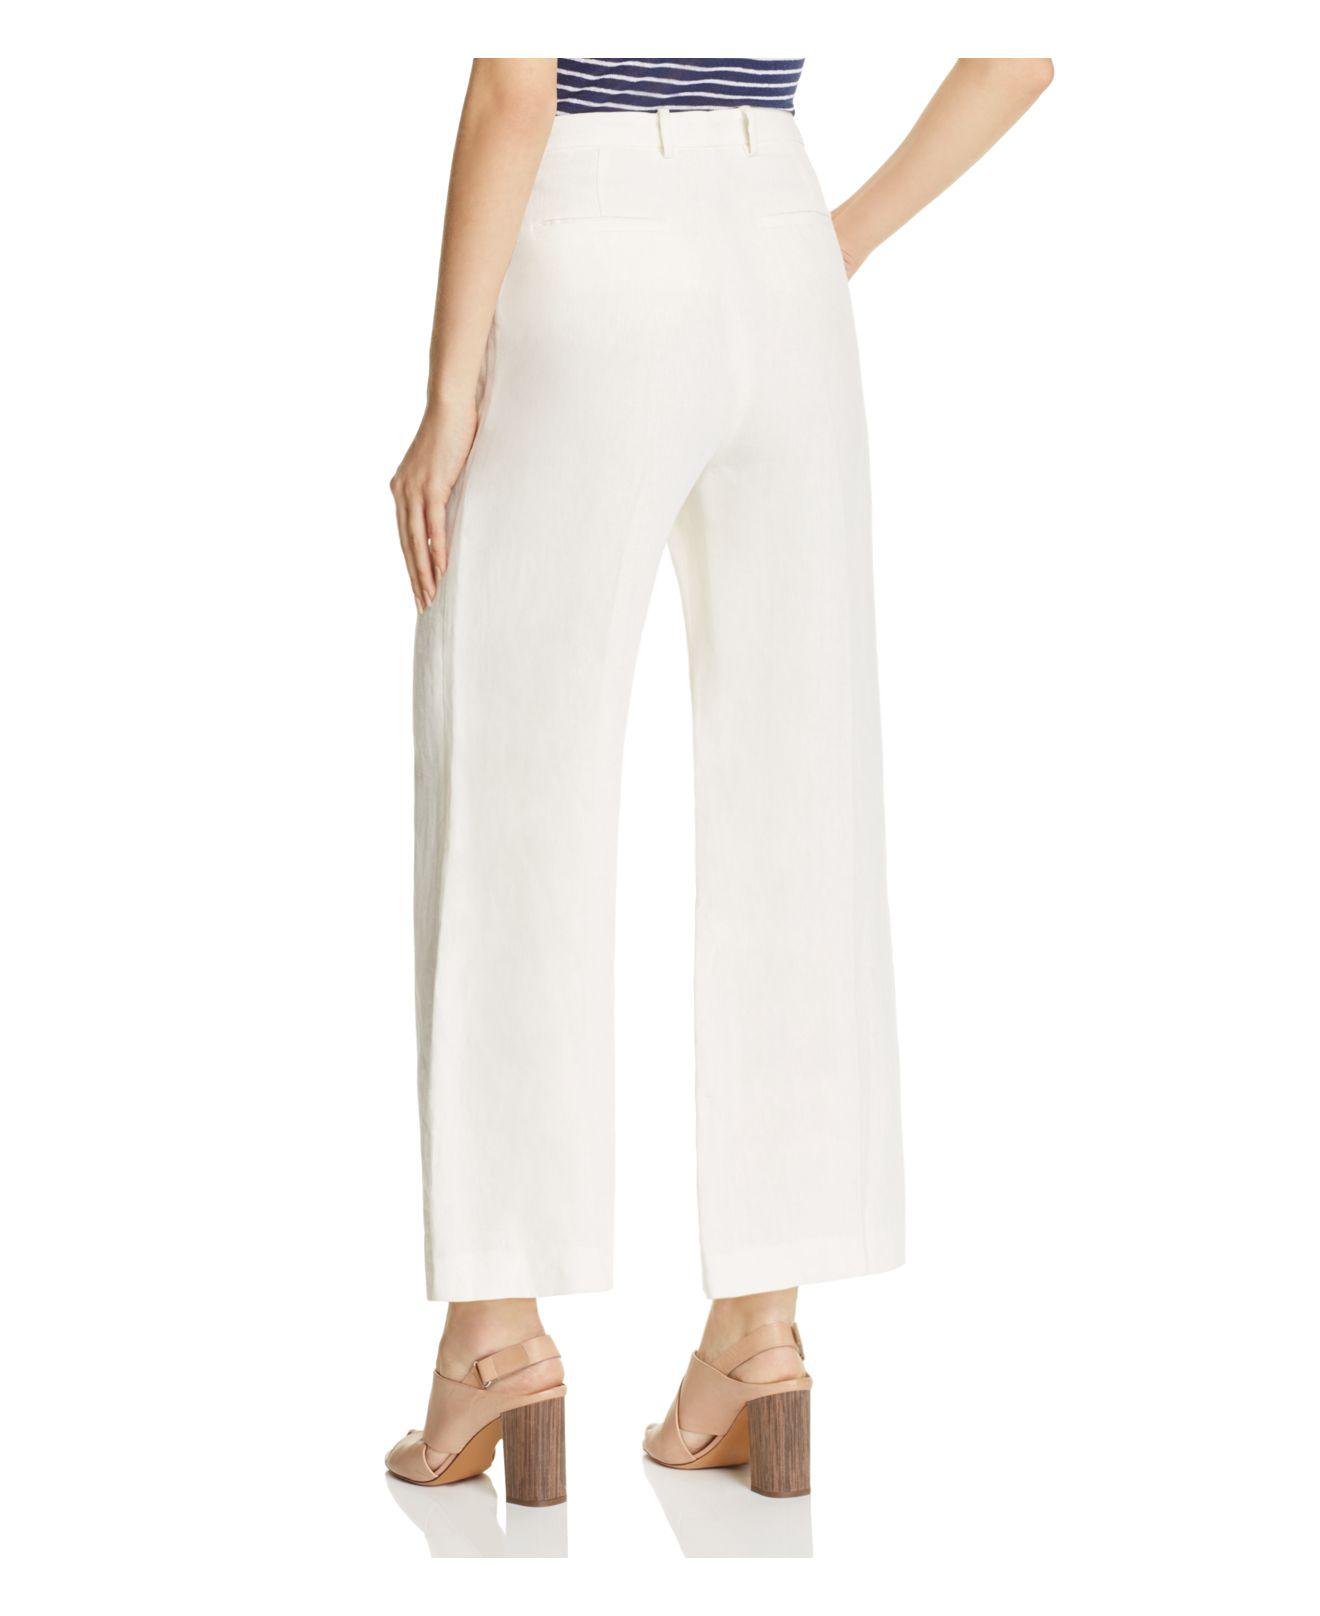 Theory Nadeema Linen Flare Pants in White - Lyst